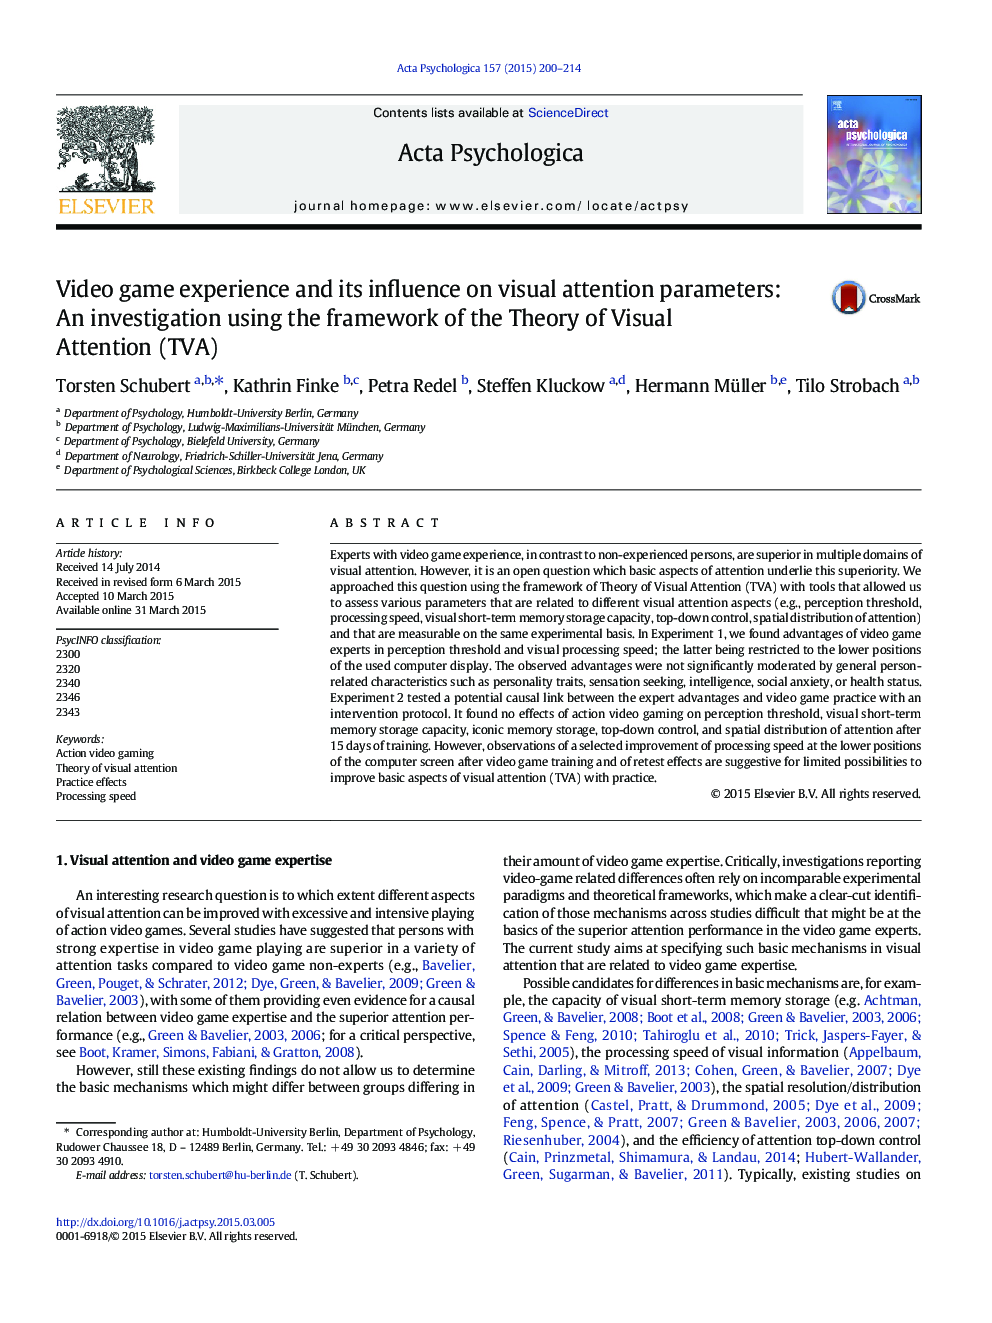 Video game experience and its influence on visual attention parameters: An investigation using the framework of the Theory of Visual Attention (TVA)